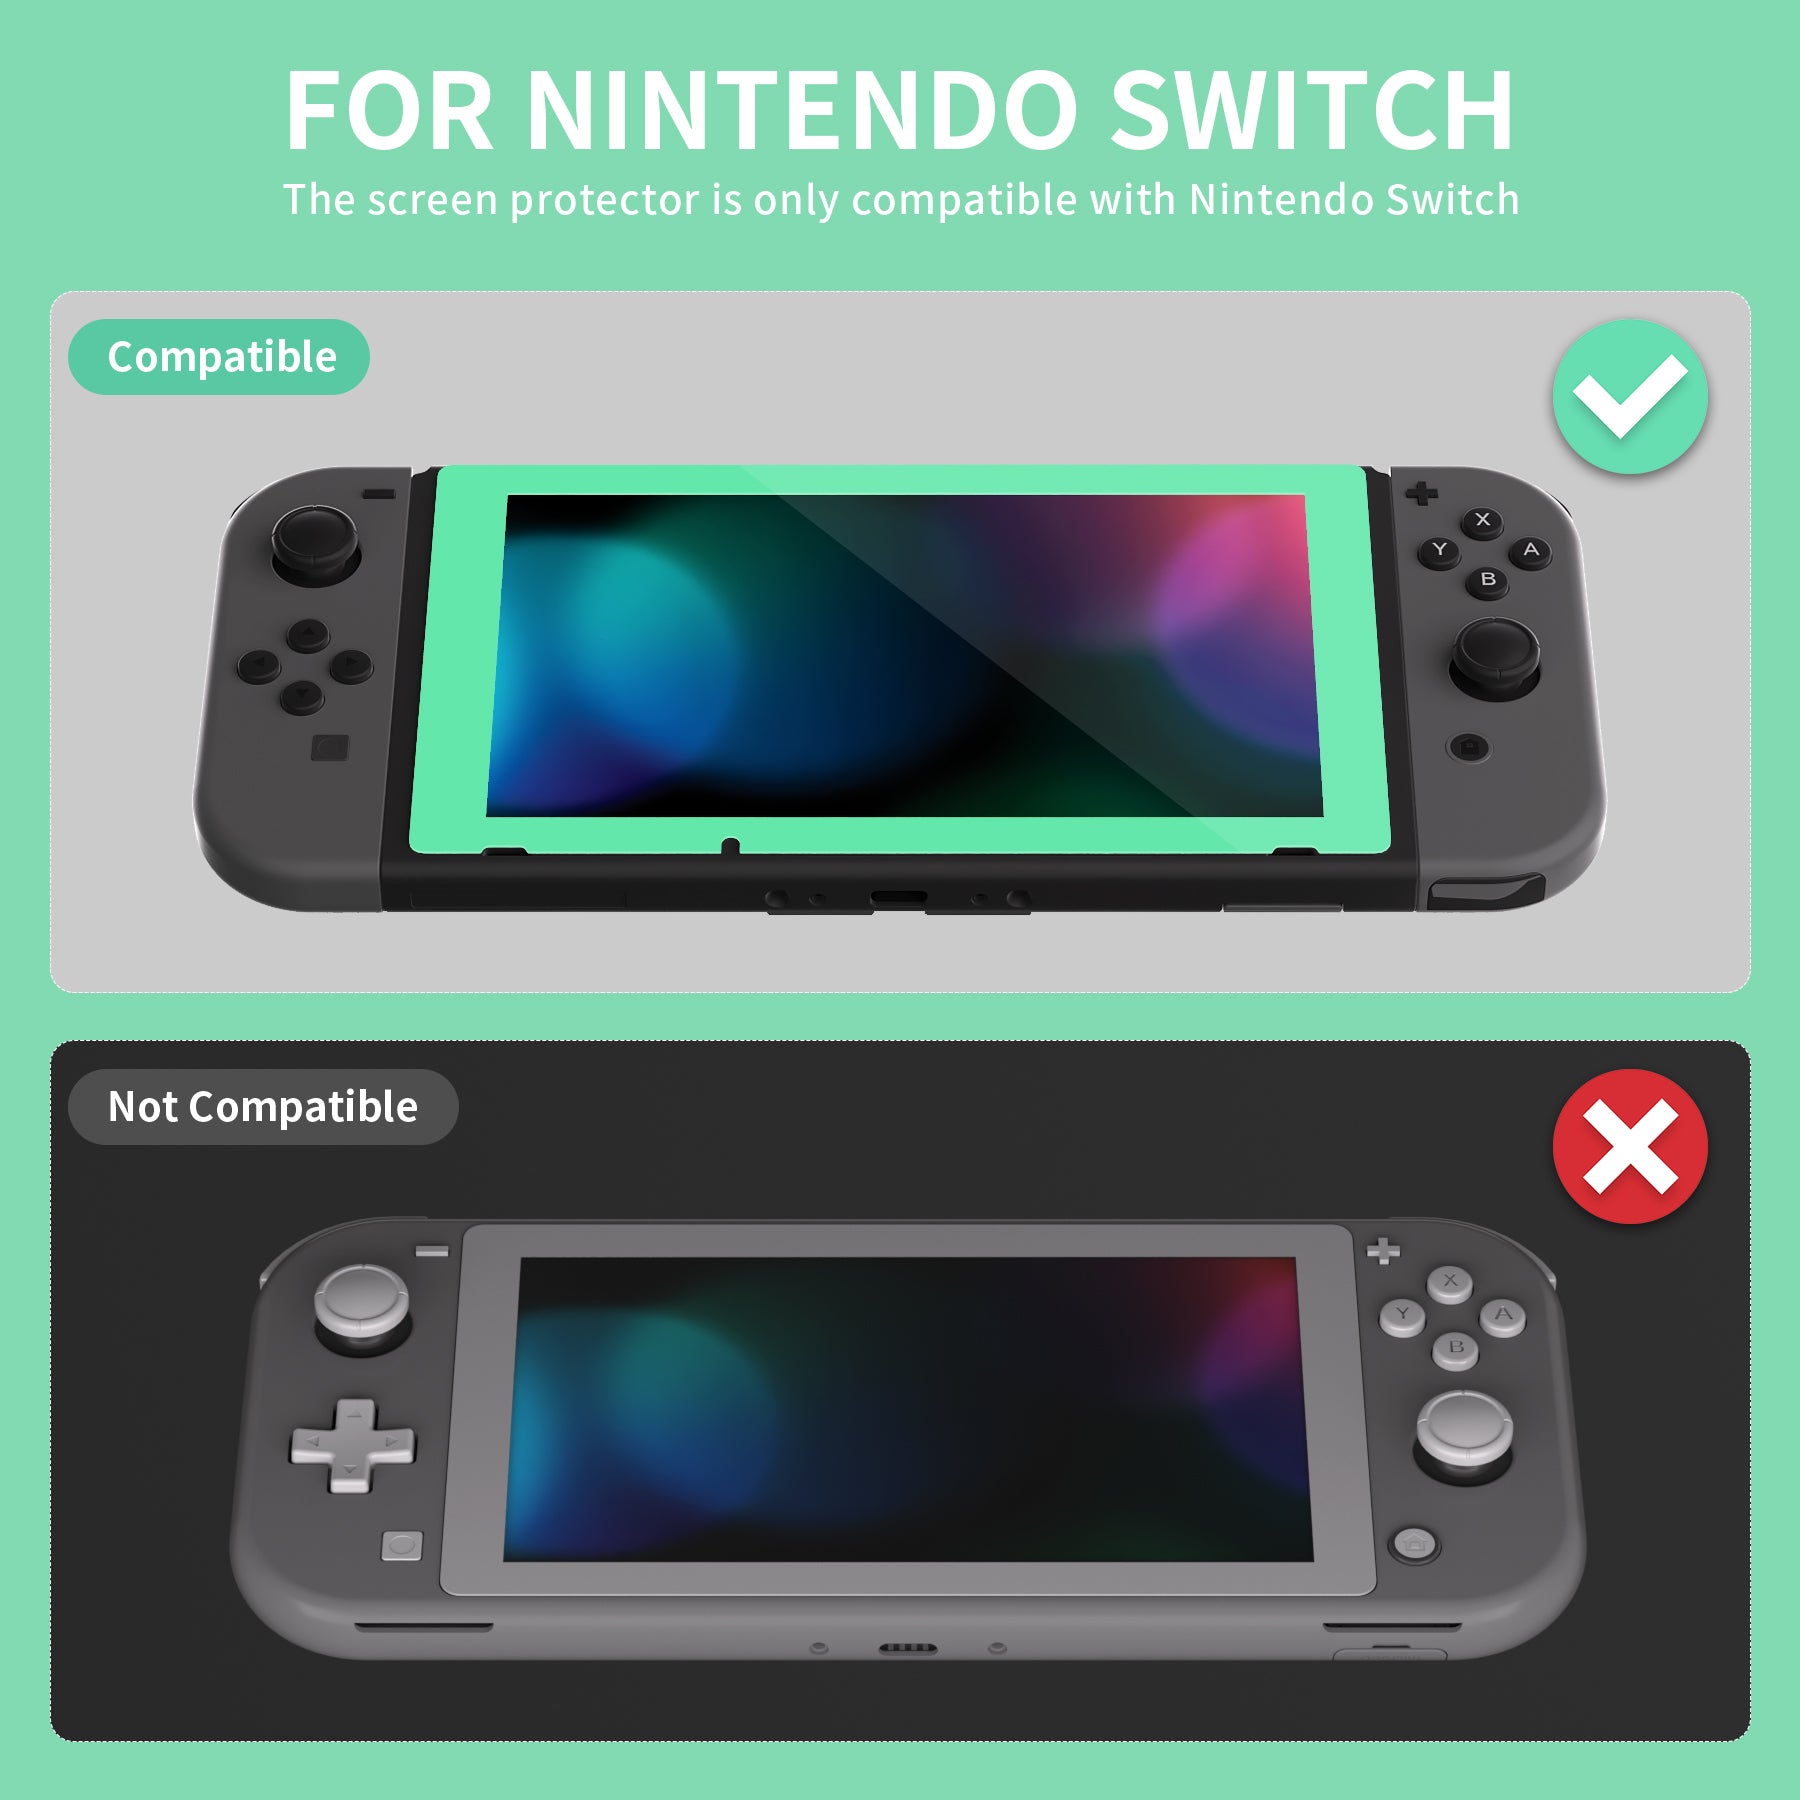 2 Pack Mint Green Border Transparent HD Clear Saver Protector Film, Tempered Glass Screen Protector for Nintendo Switch [Anti-Scratch, Anti-Fingerprint, Shatterproof, Bubble-Free] - NSPJ0706 playvital